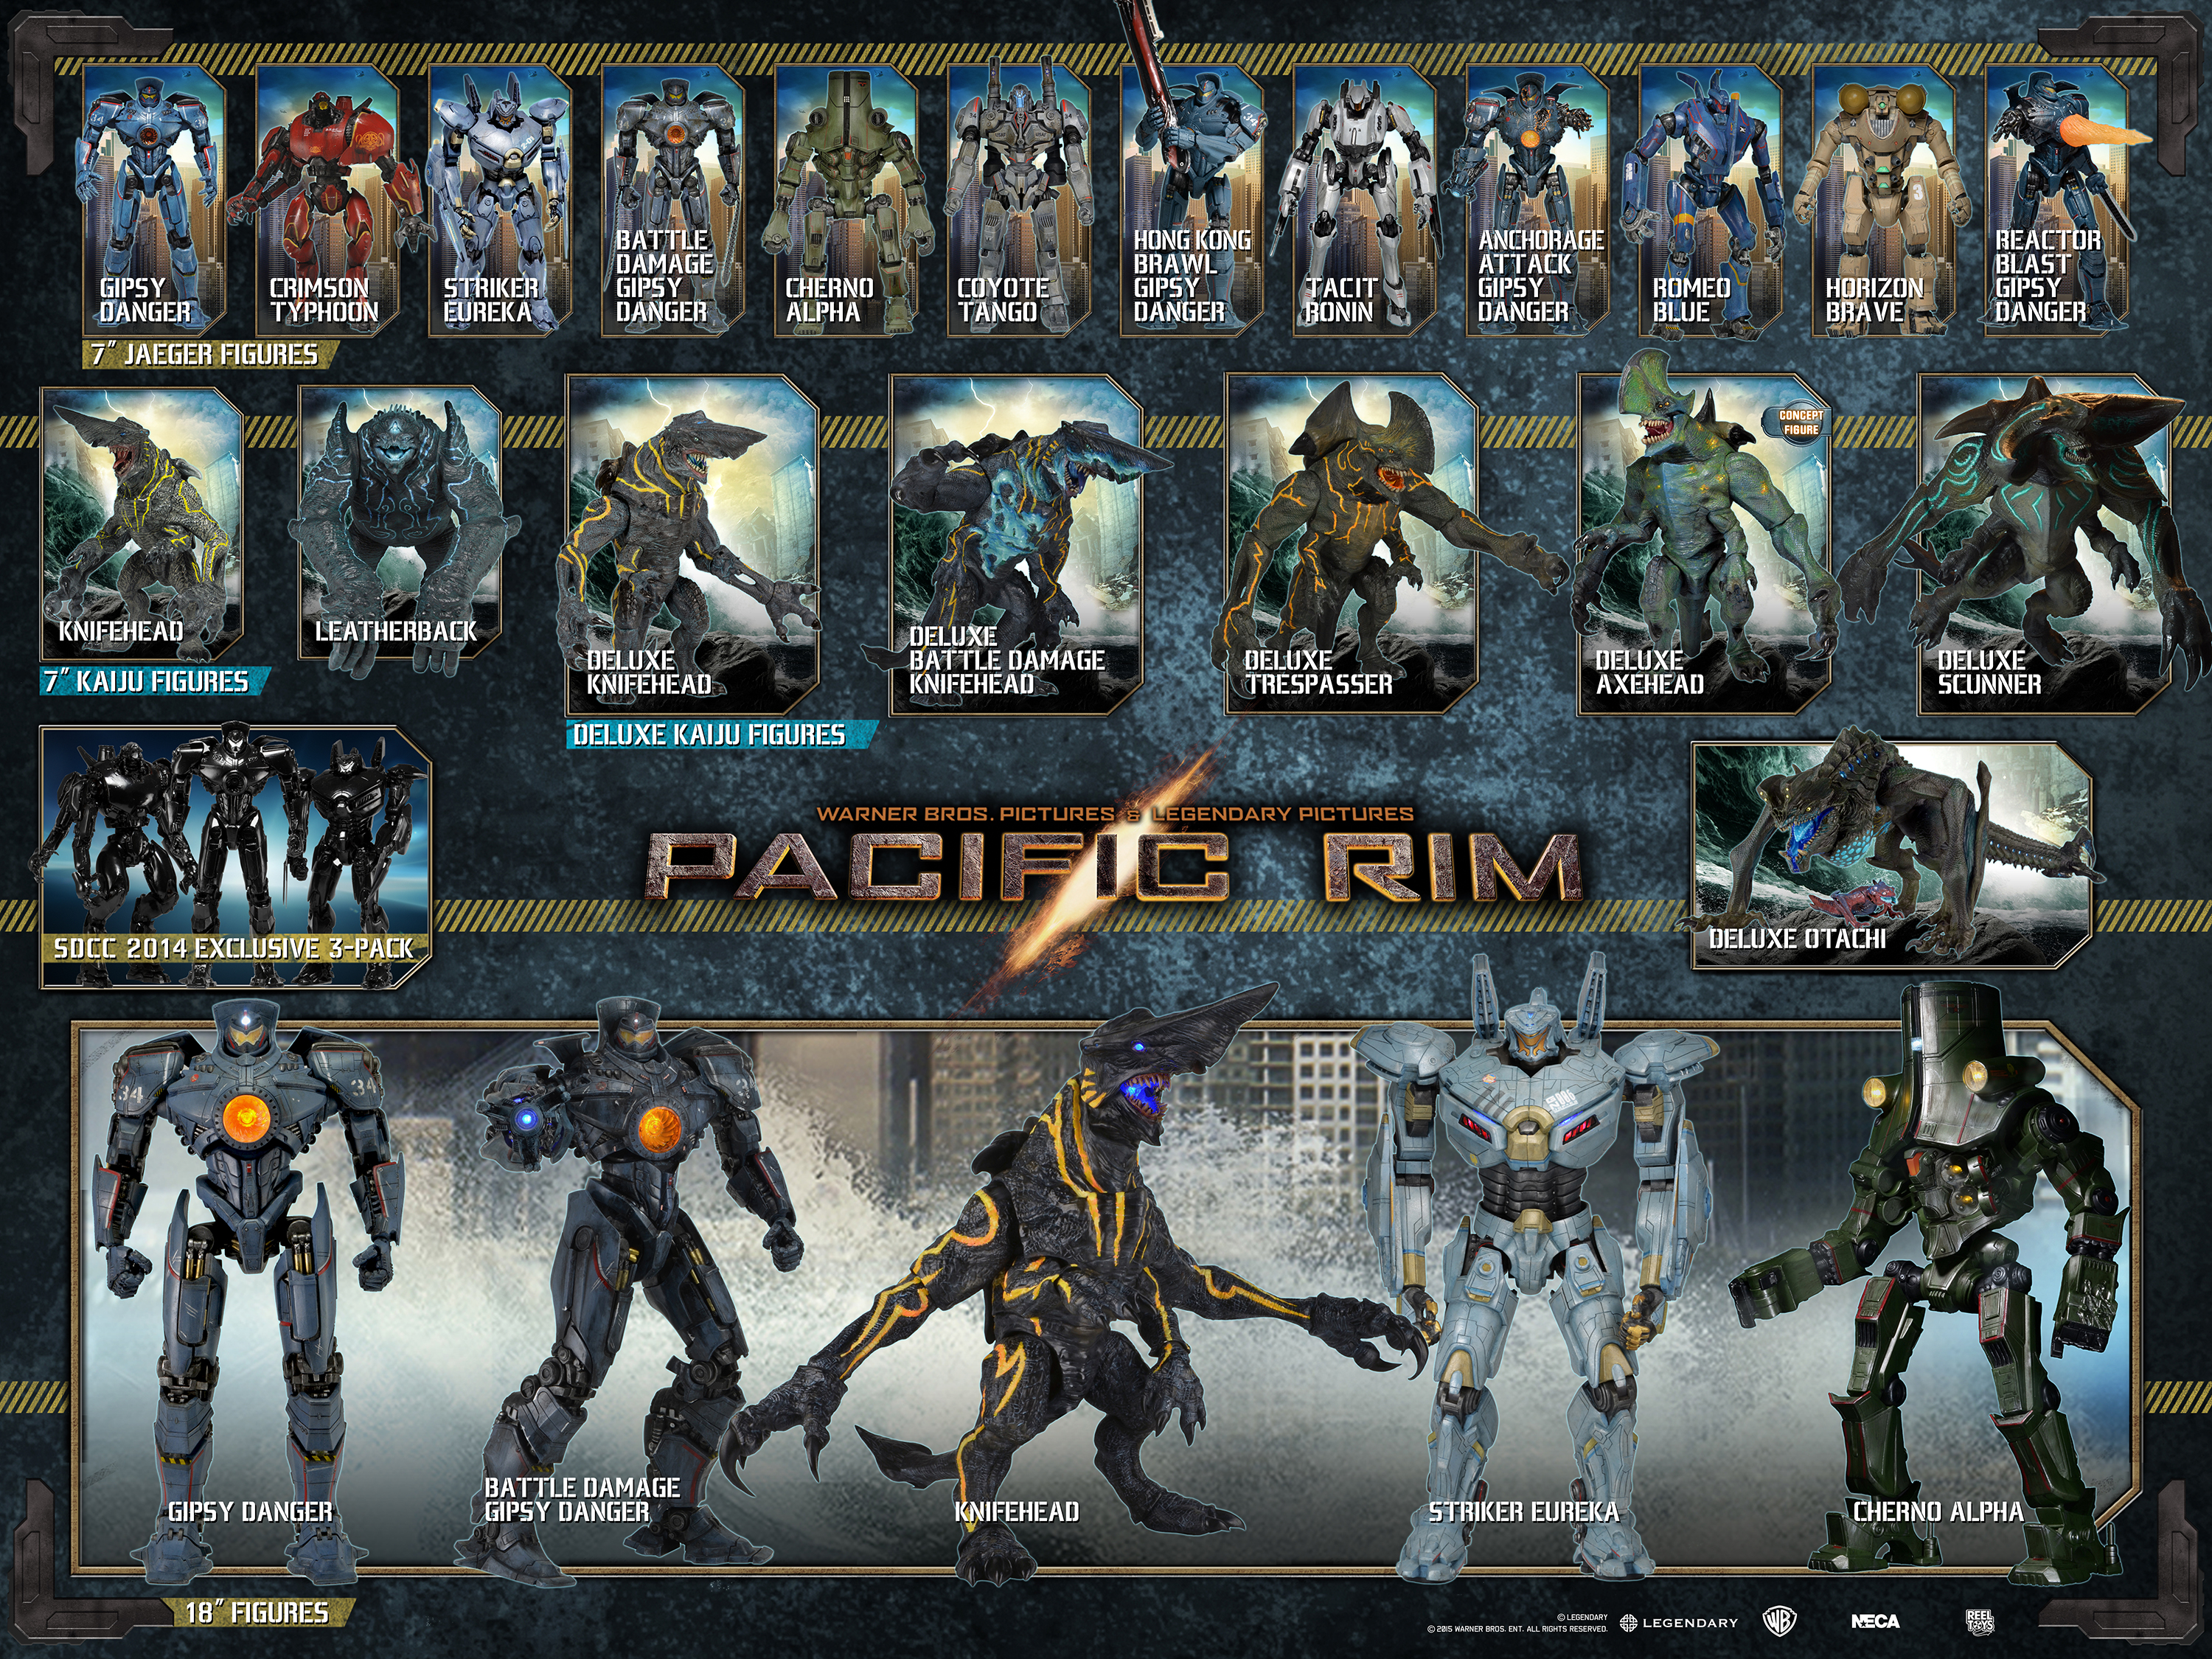 Amazing Pacific Rim Pictures & Backgrounds